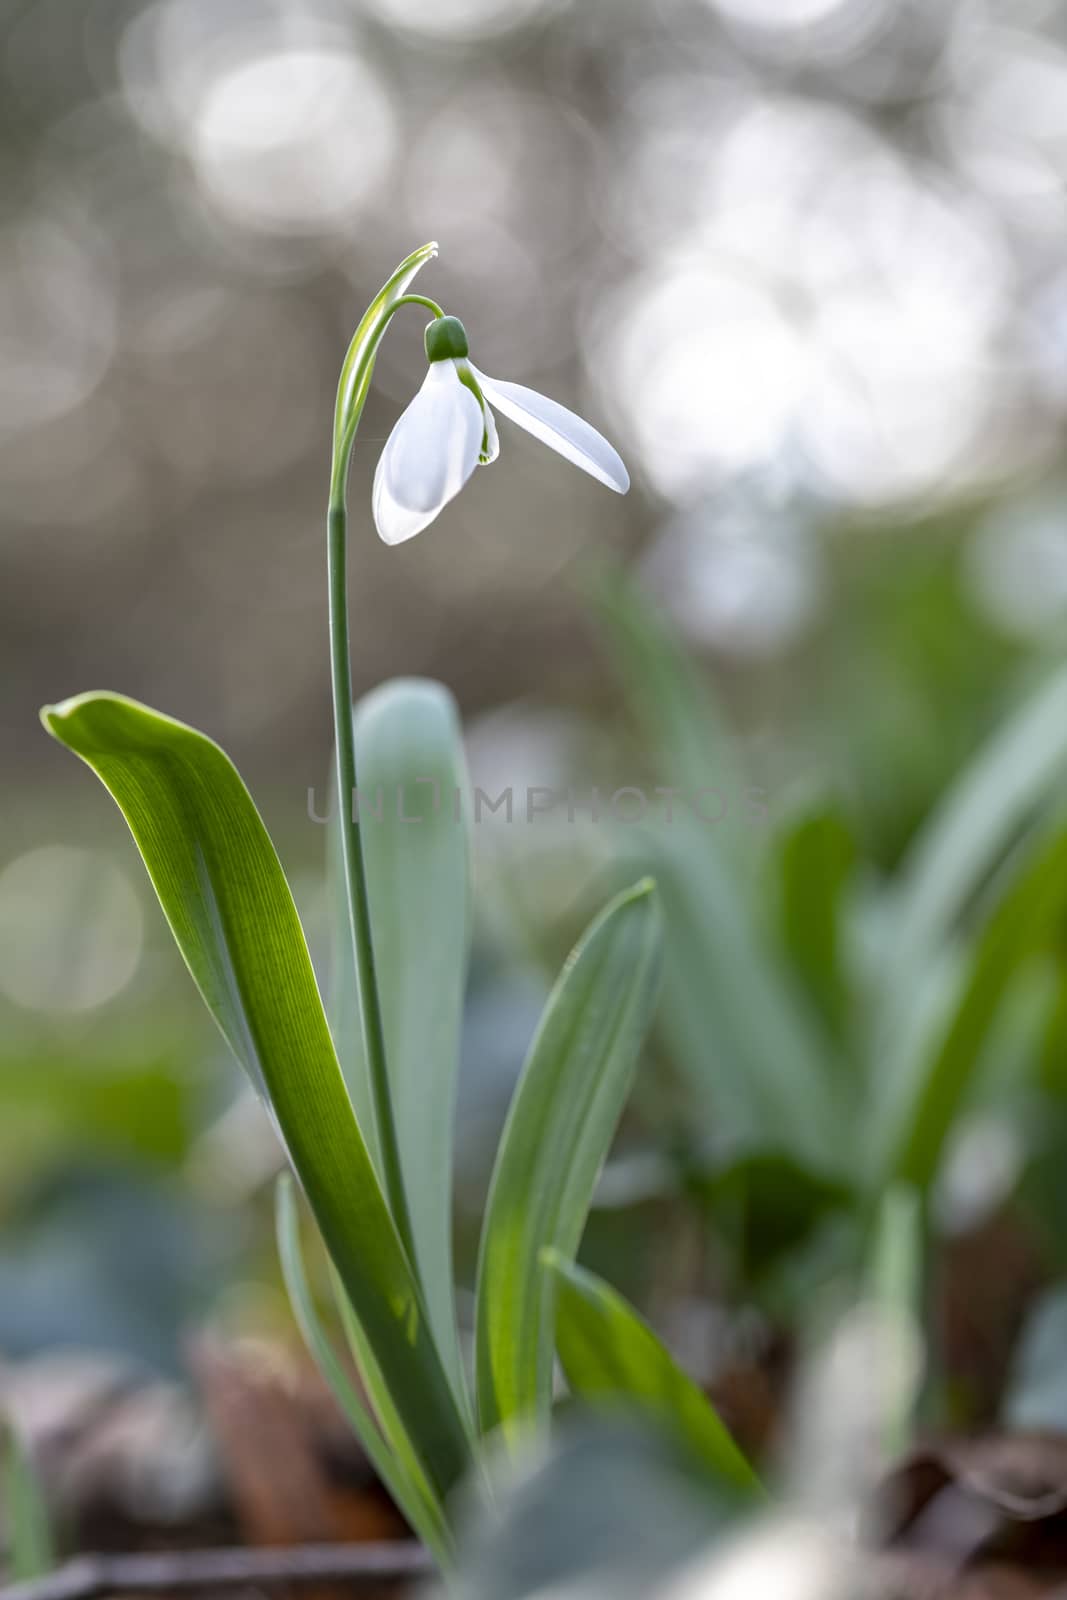 While snowdrop flower blooming in the edge and bright areas of the bushes